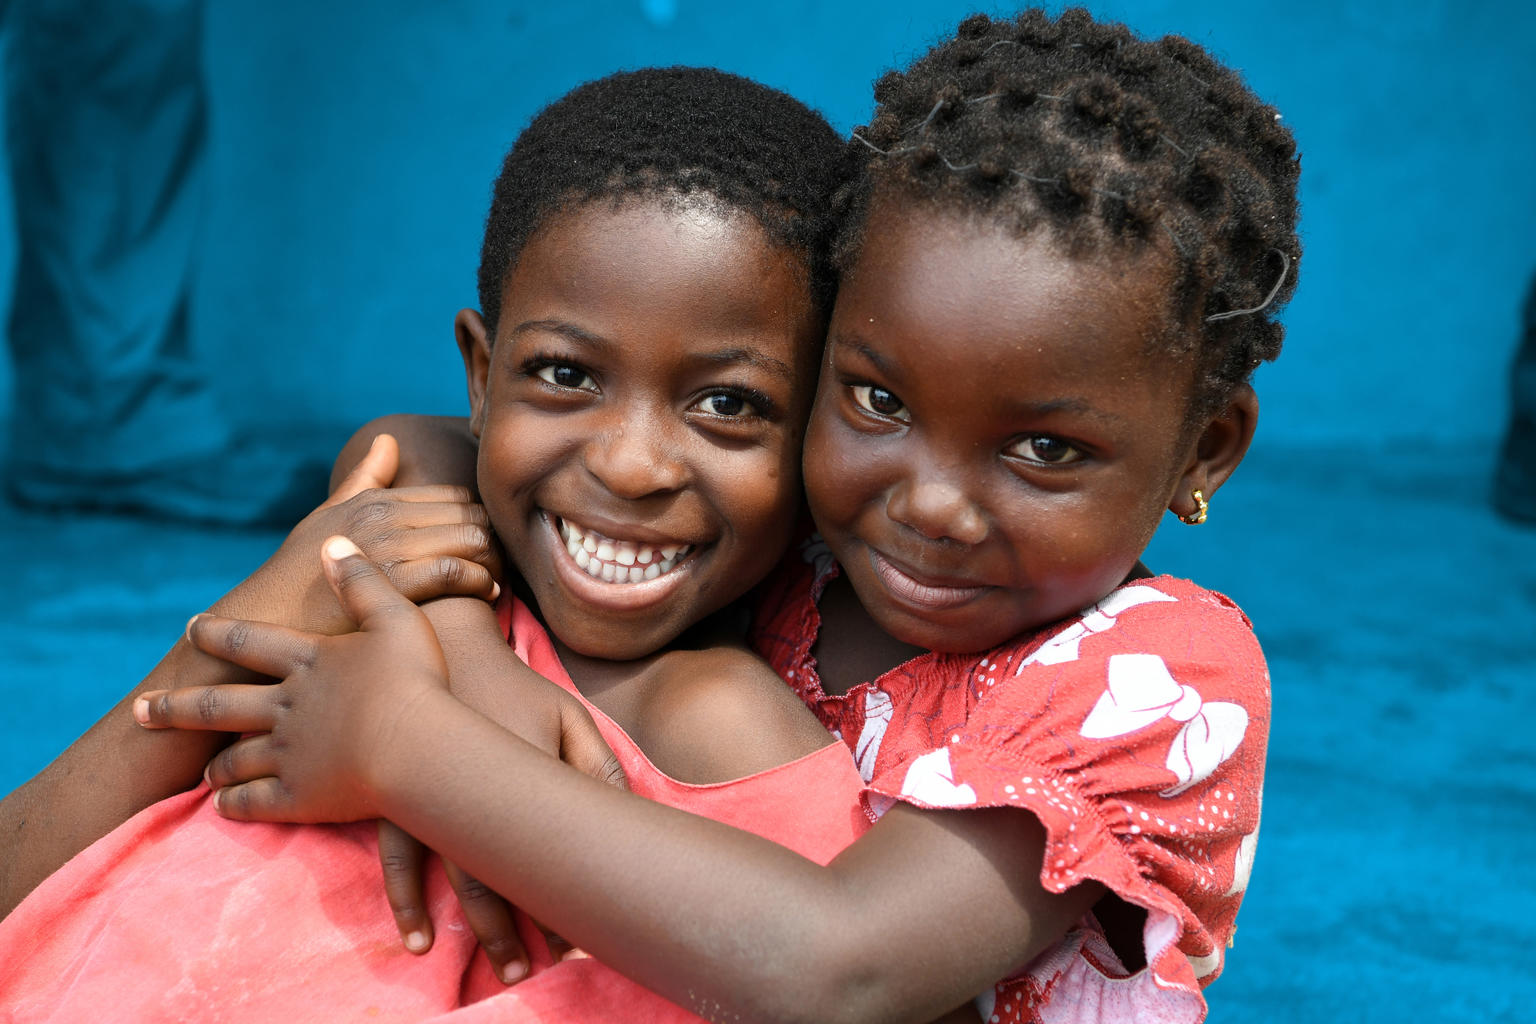 Smiling girls hugging each other in Abidjan, the capital of Côte d'Ivoire.